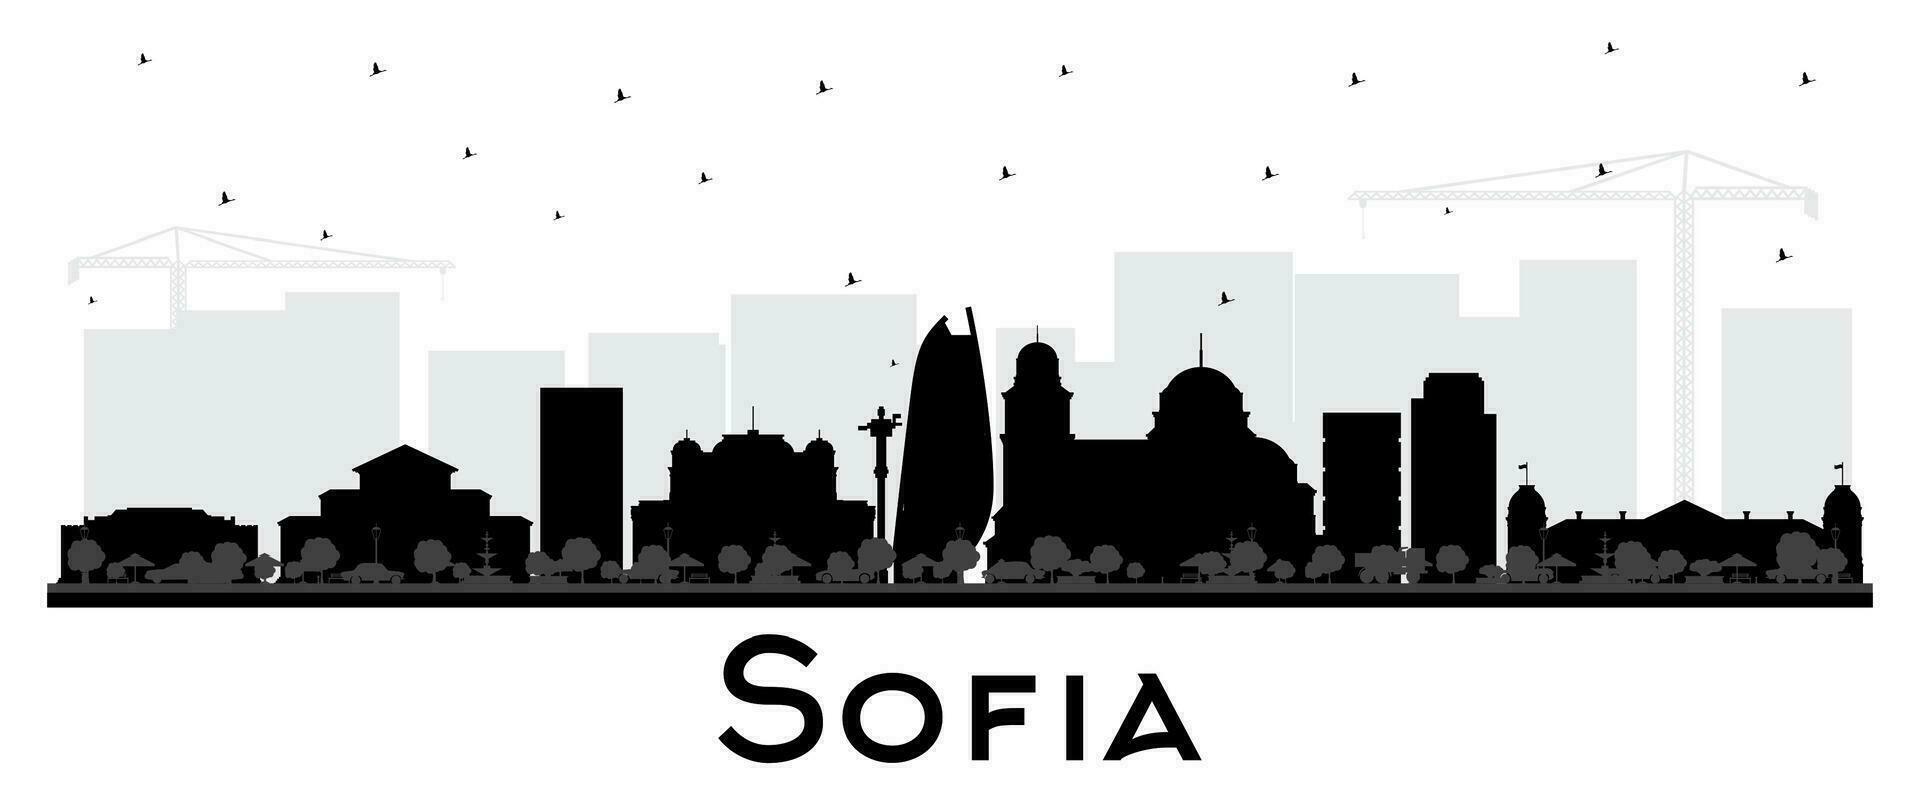 Sofia Bulgaria city skyline silhouette with black buildings isolated on white. vector